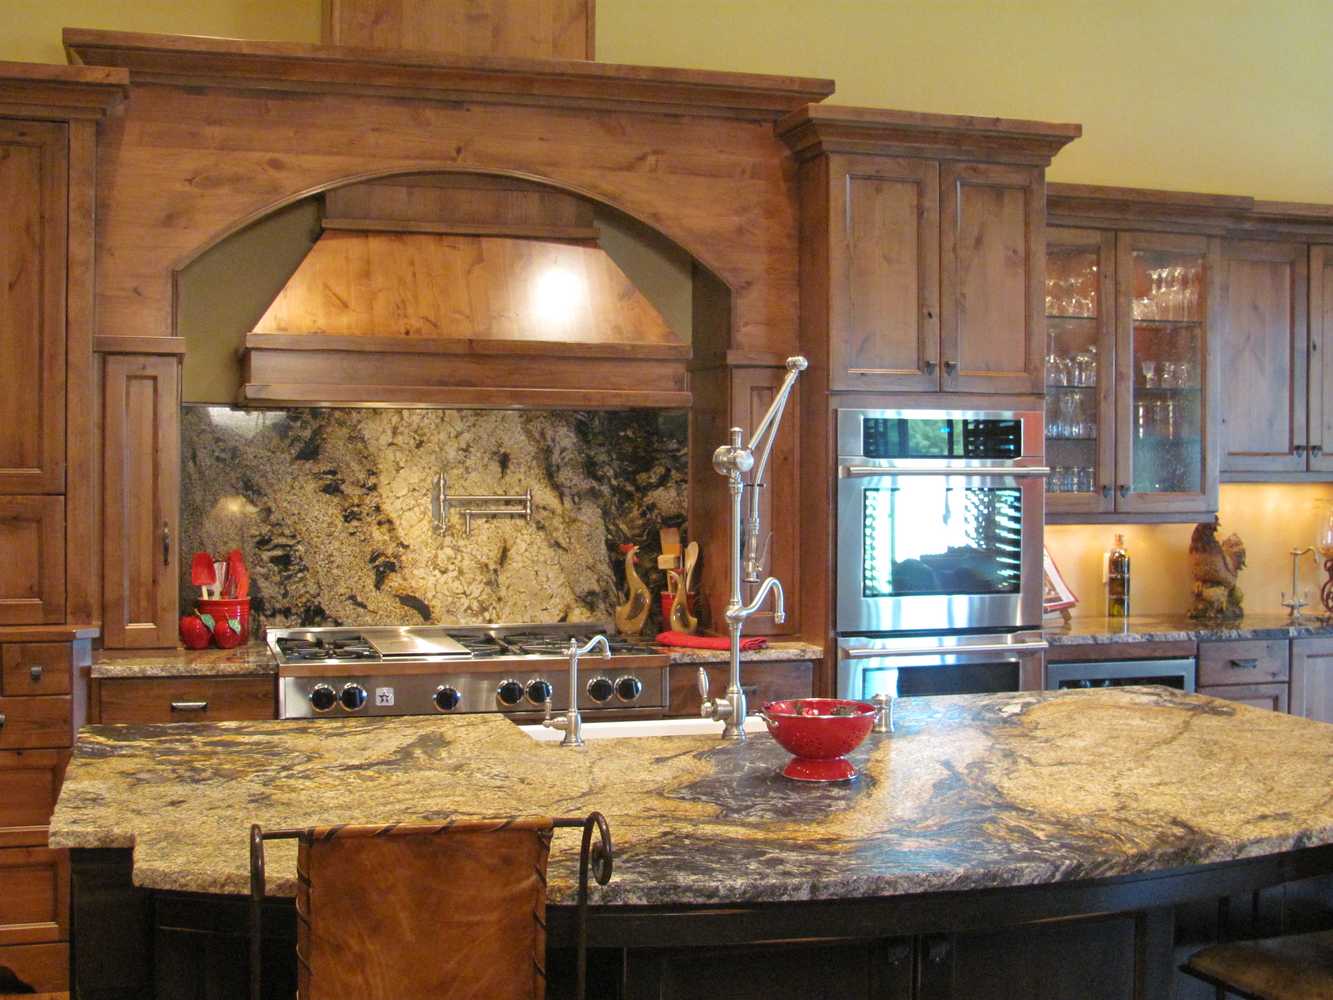 Project photos from American Marble Granite Inc